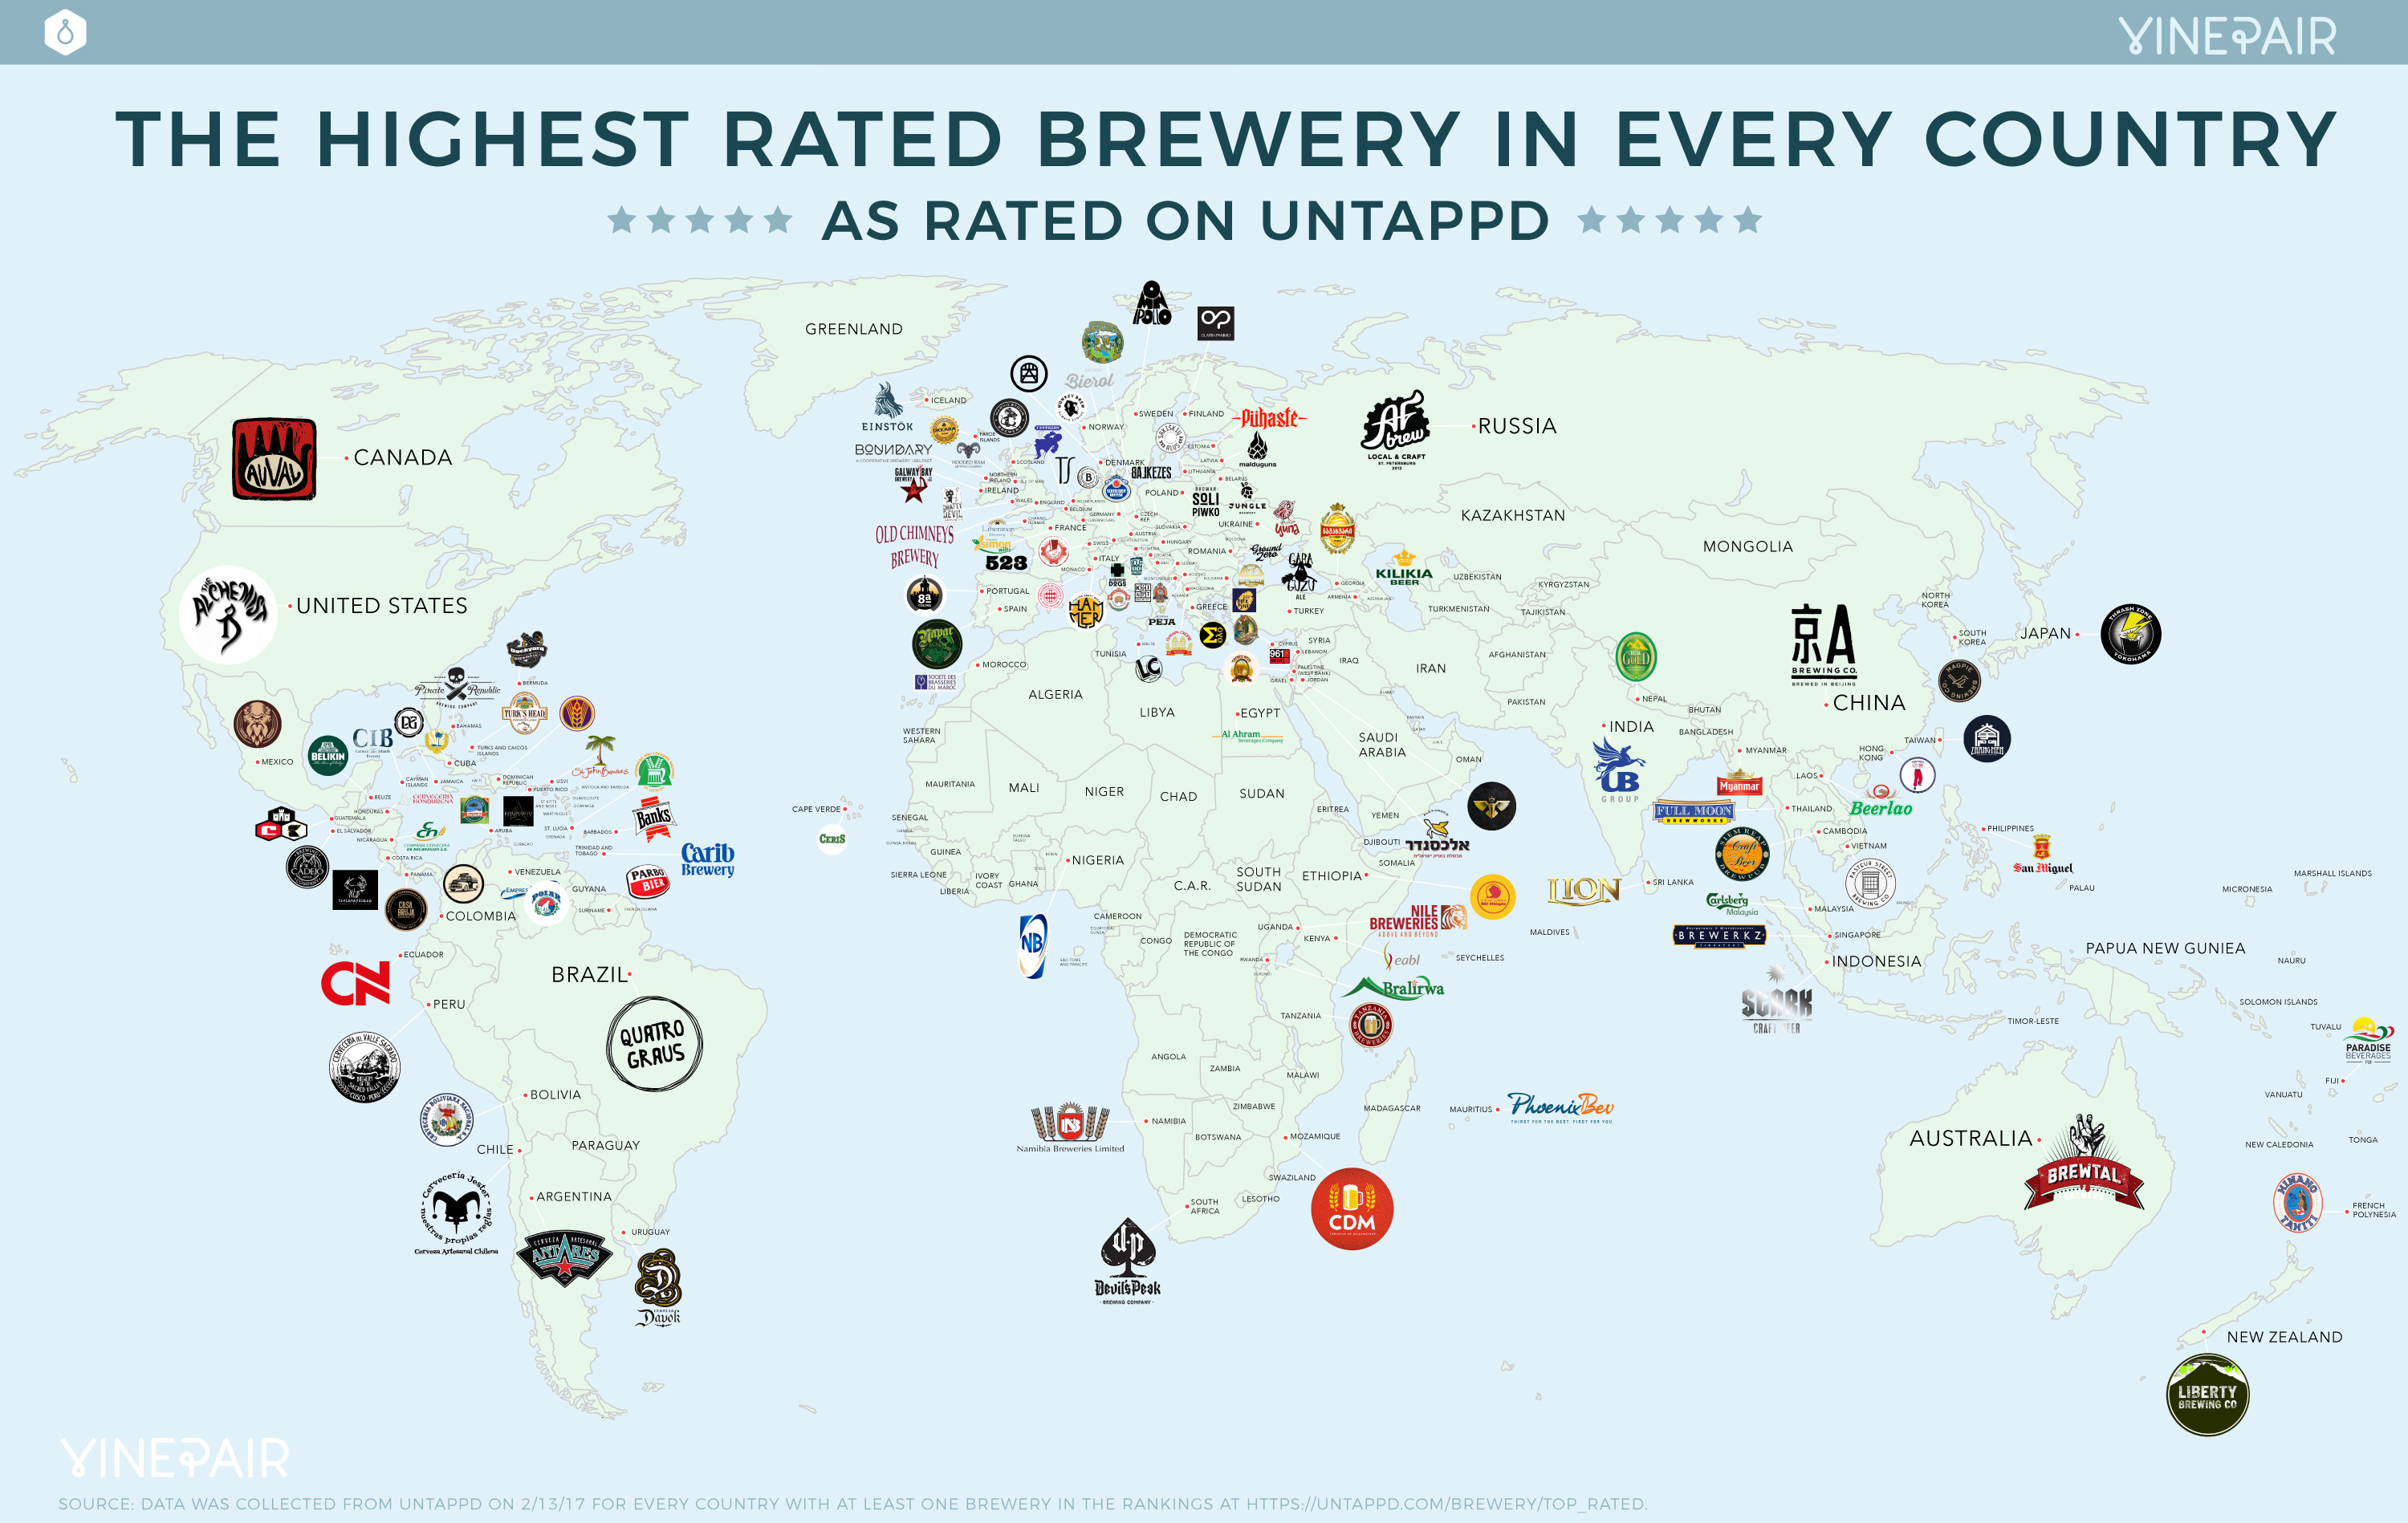 MAP: The Highest Rated Brewery In Every Country According To Untappd (2017)